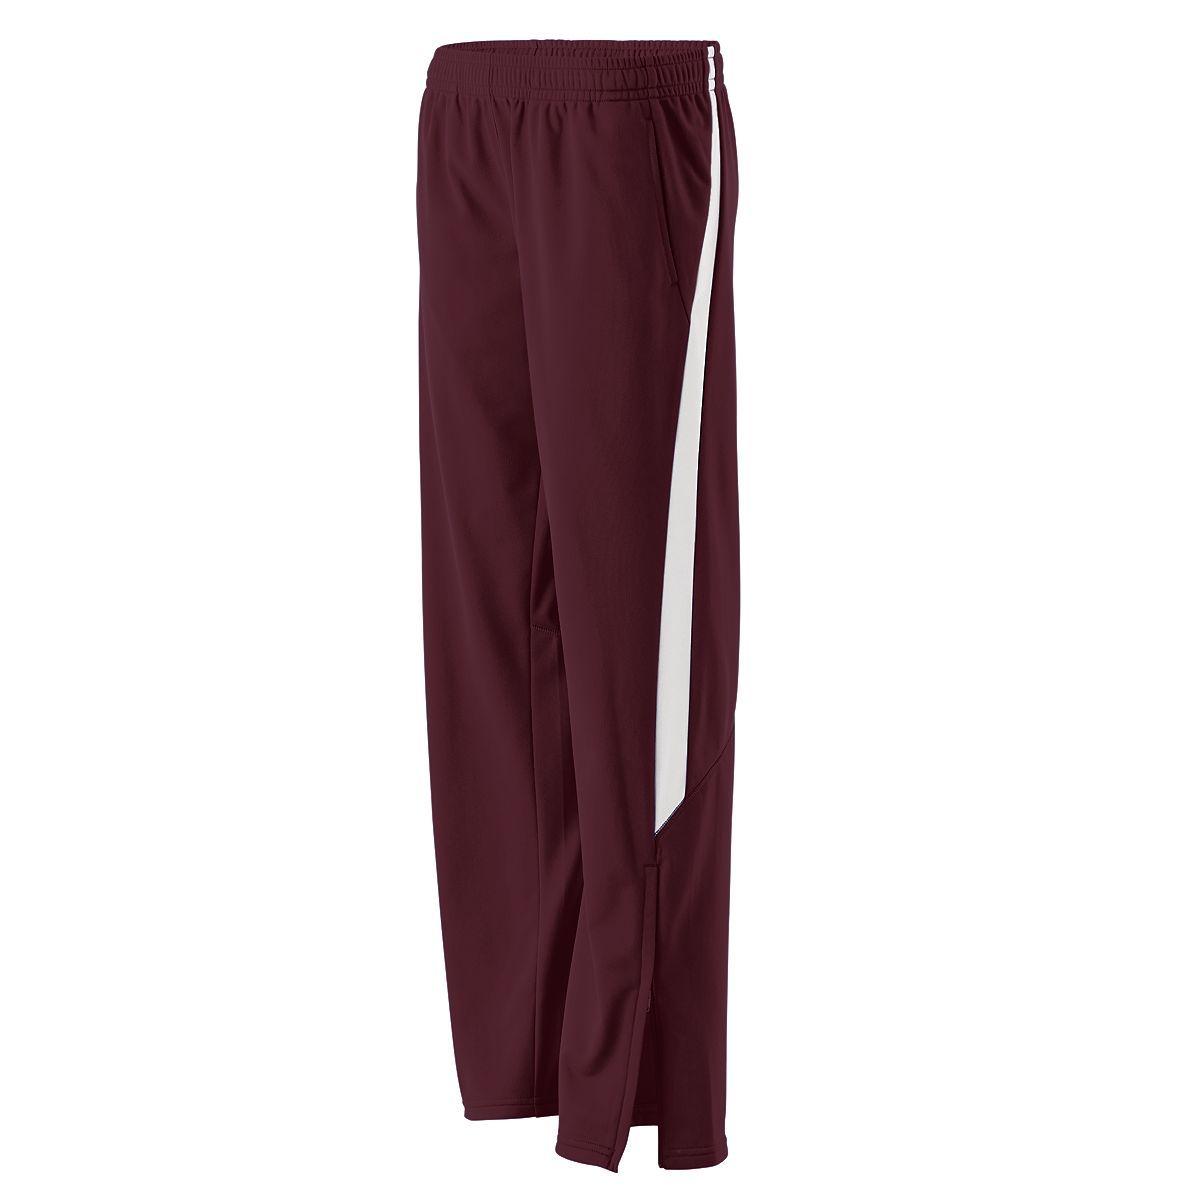 Holloway Ladies Determination Pant in Maroon/White  -Part of the Ladies, Ladies-Pants, Pants, Holloway product lines at KanaleyCreations.com